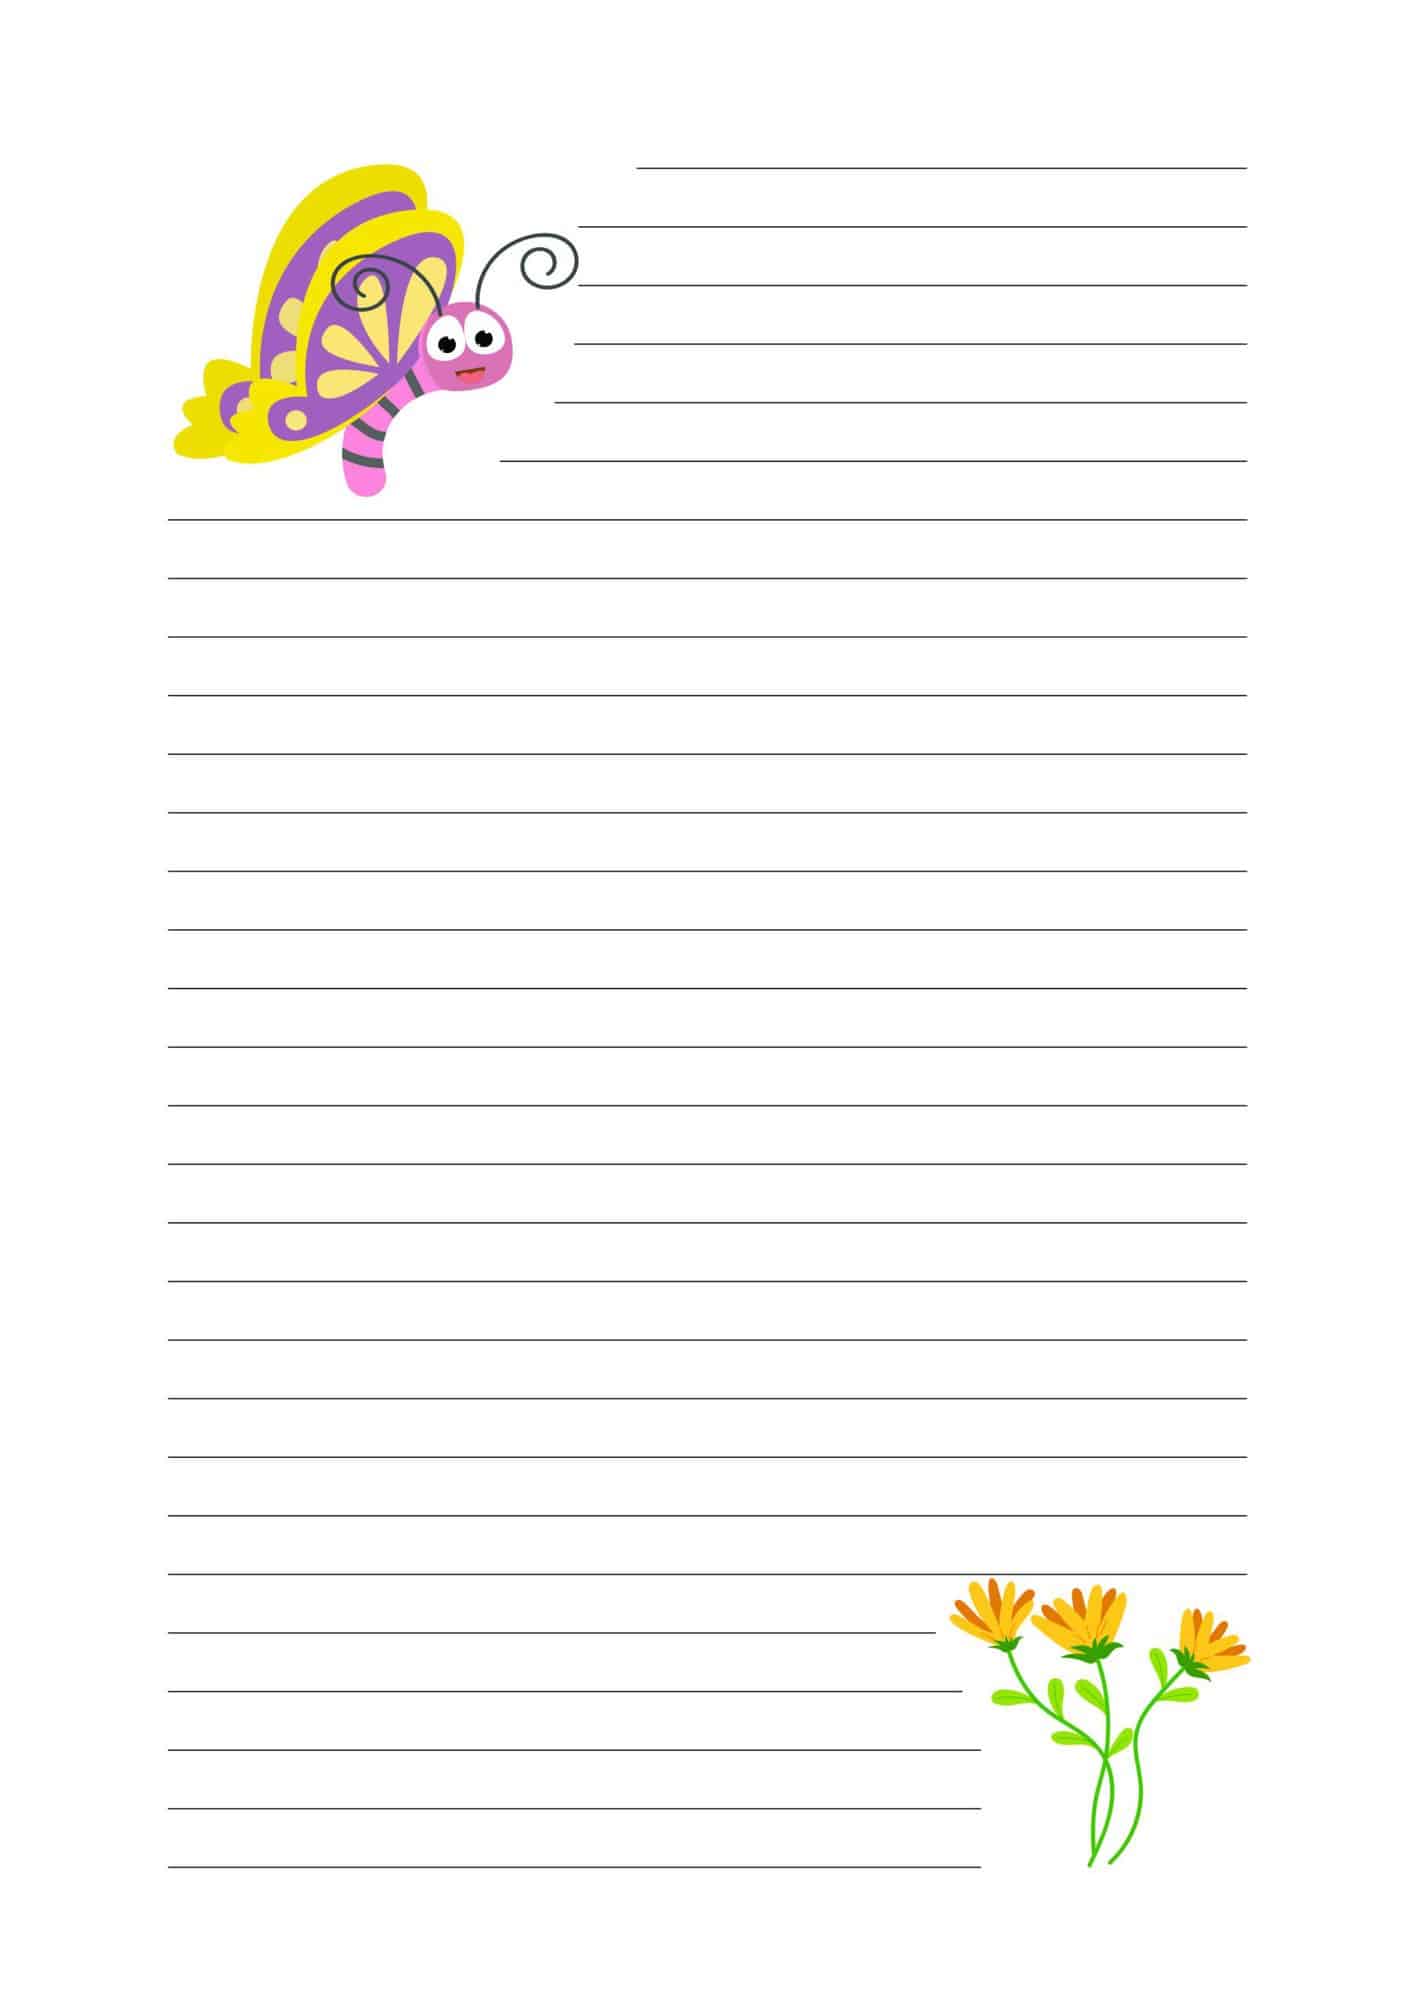 Lined paper template with yellow butterfly and yellow flowers.